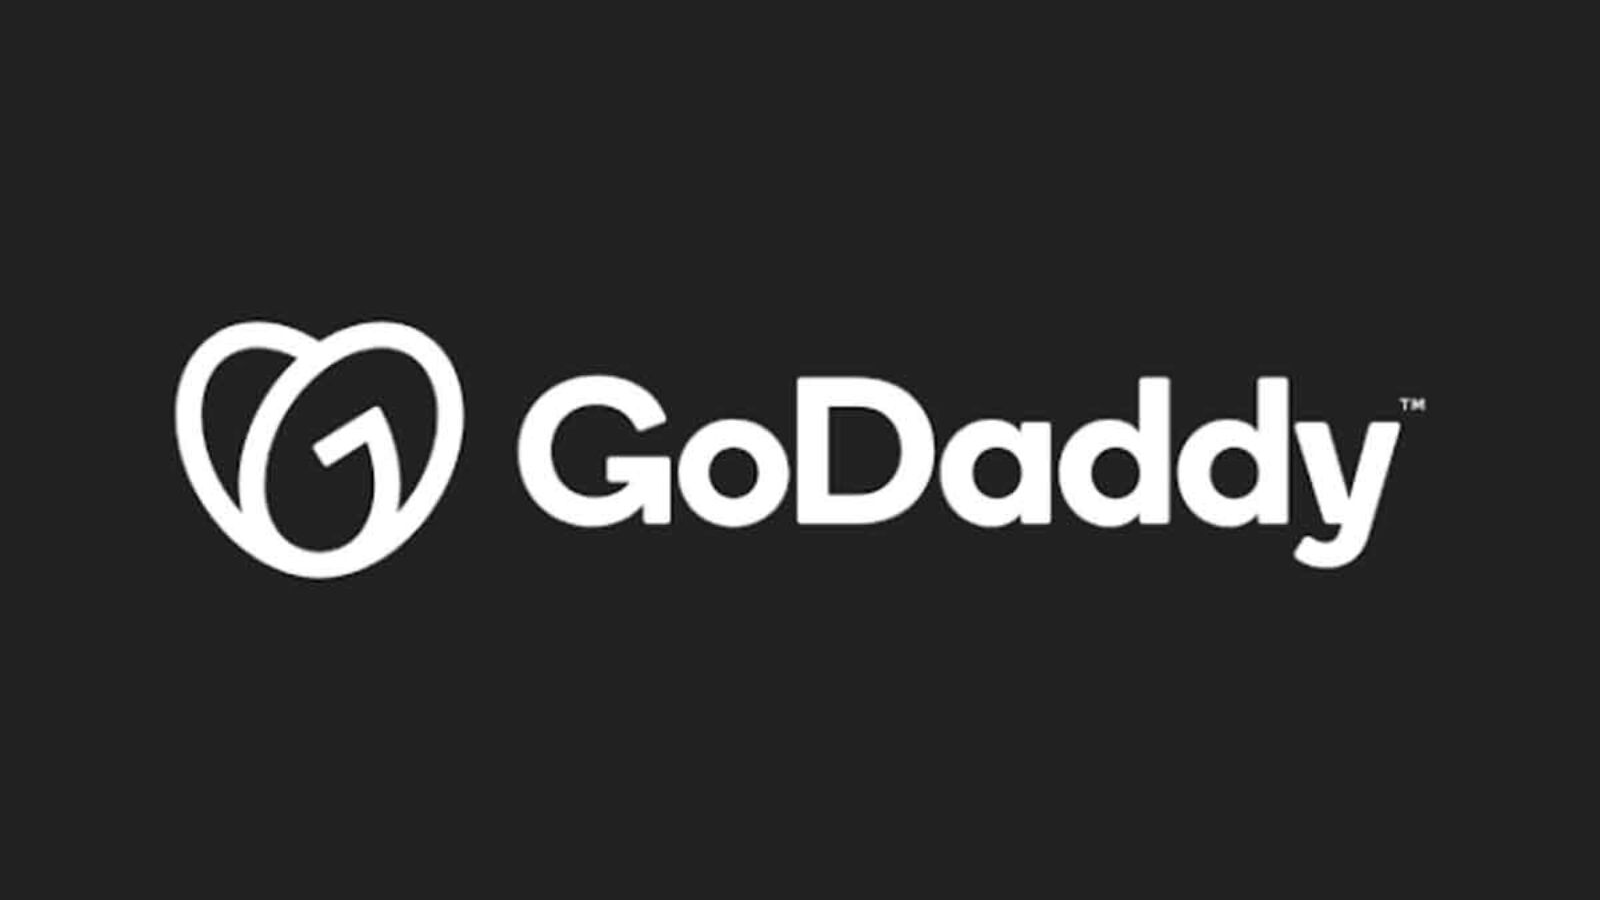 https://adgully.me/post/3084/godaddy-studio-adds-ai-powered-instant-video-capabilities